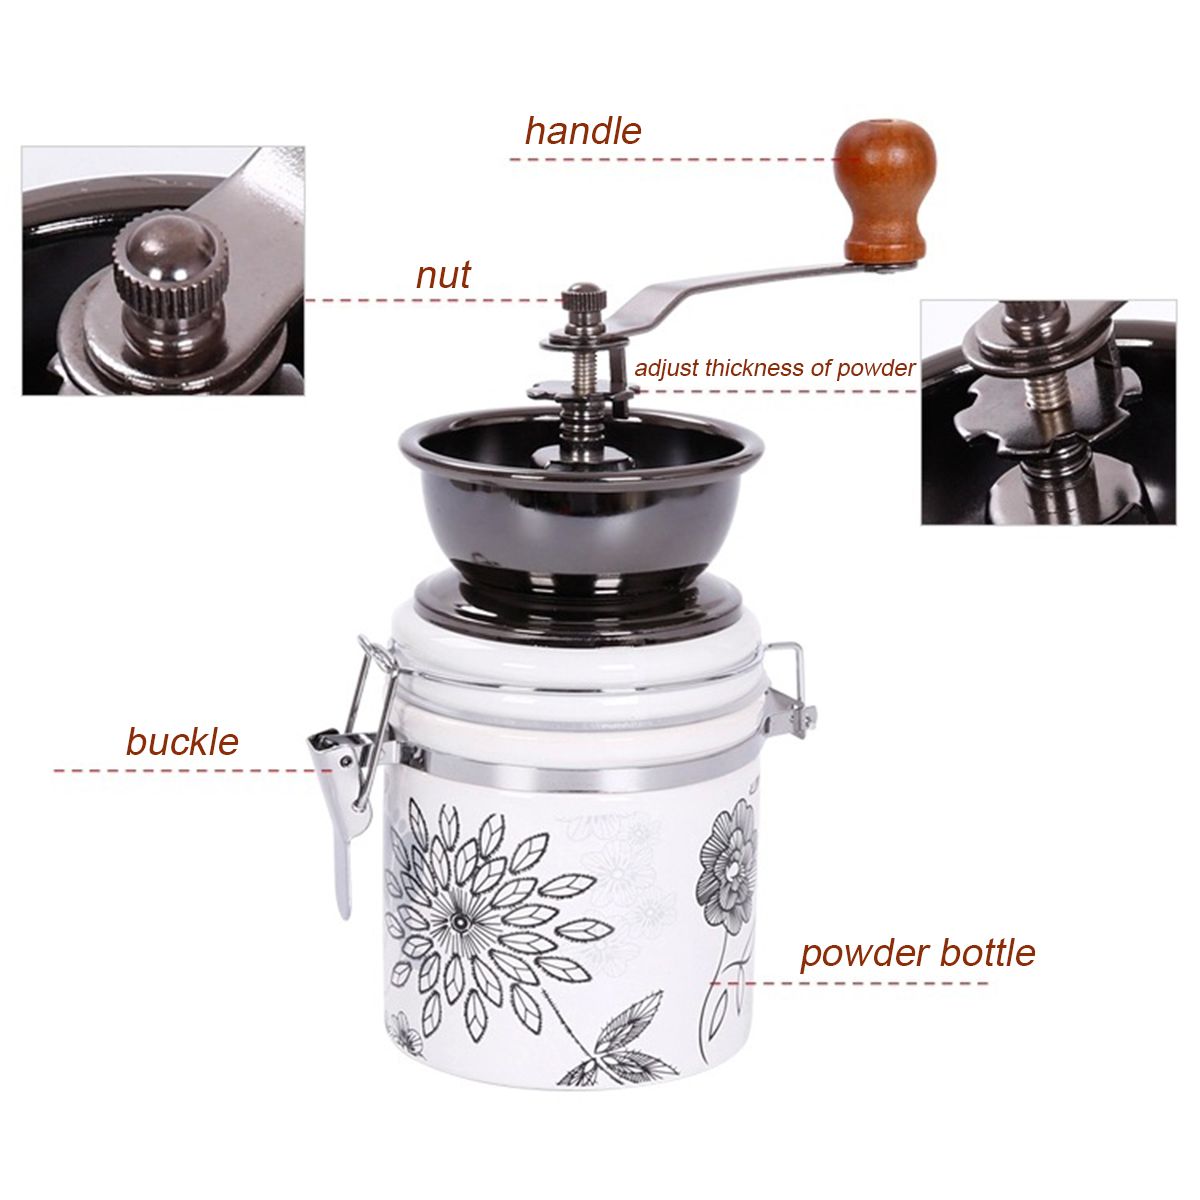 Manual-Coffee-Grinder-Portable-Hand-Crank-Stainless-Steel-Ceramic-Coffee-Mill-1572034